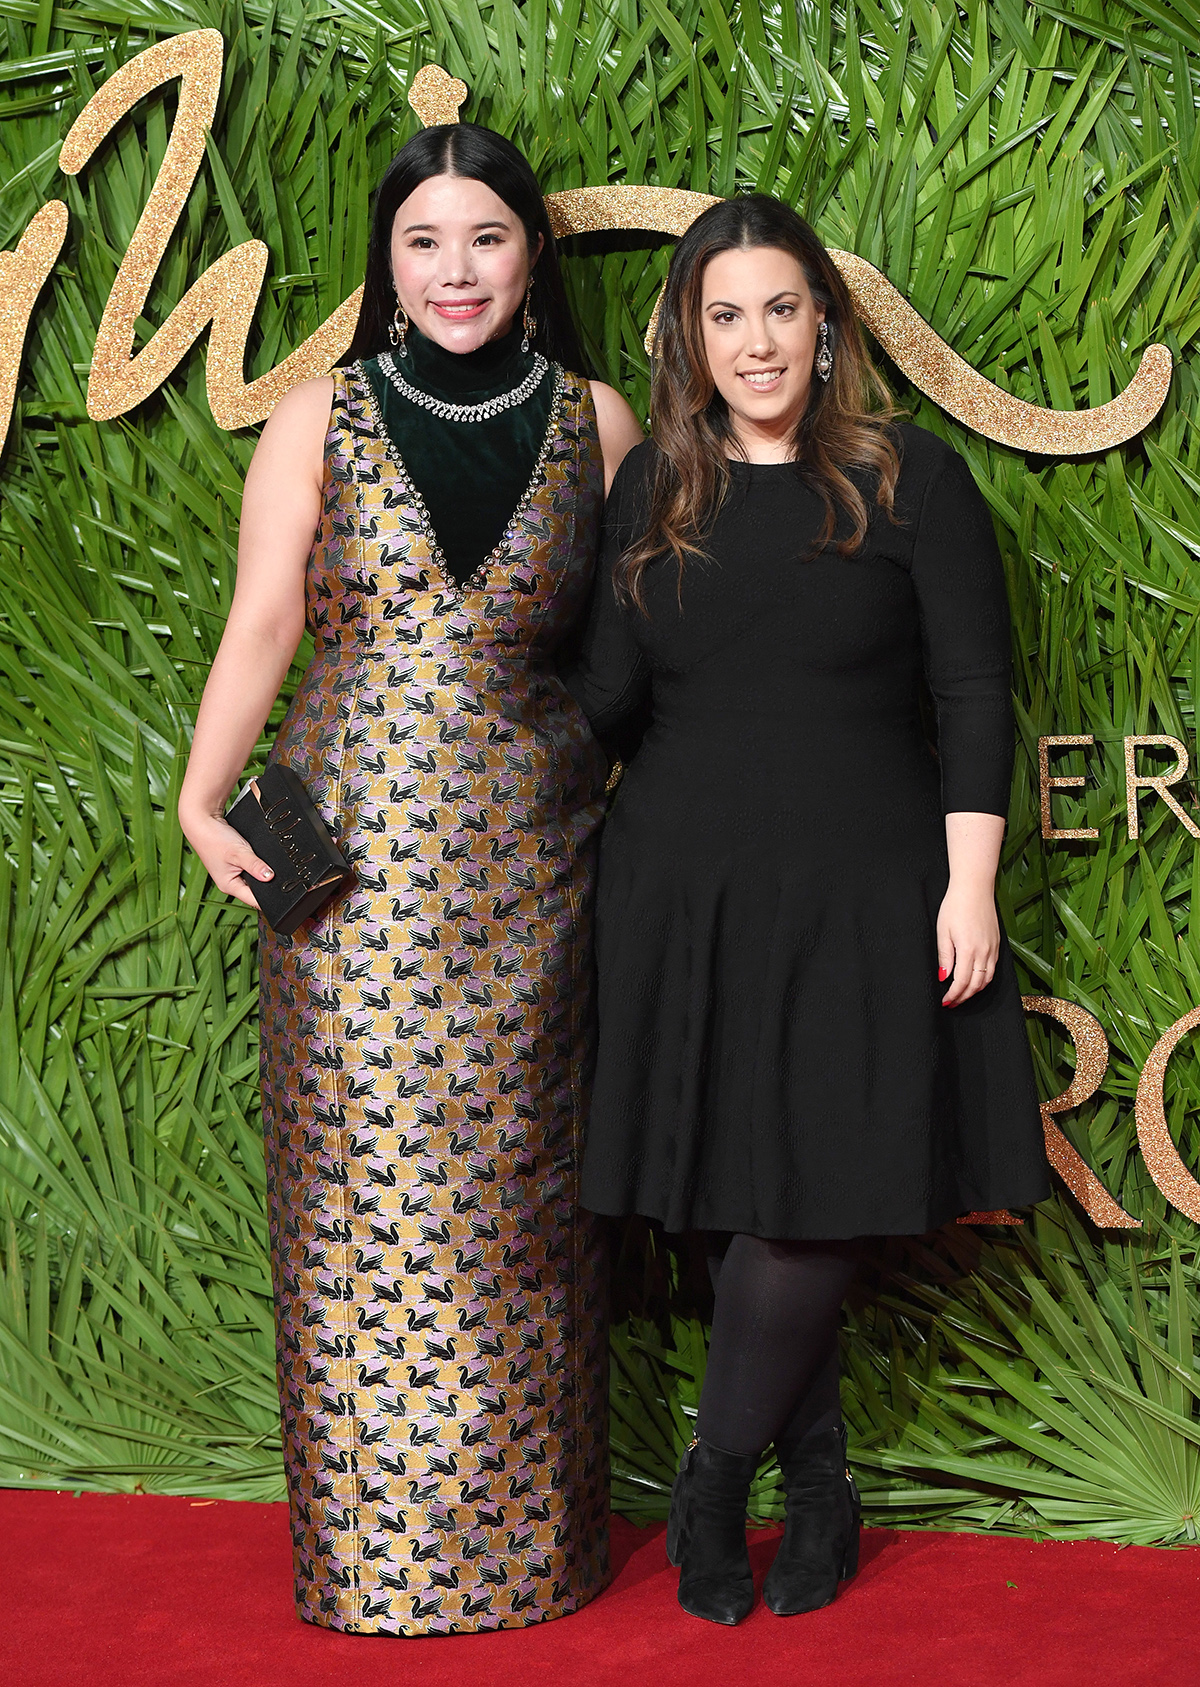 Two women posing in front of a green wall at an exclusive event